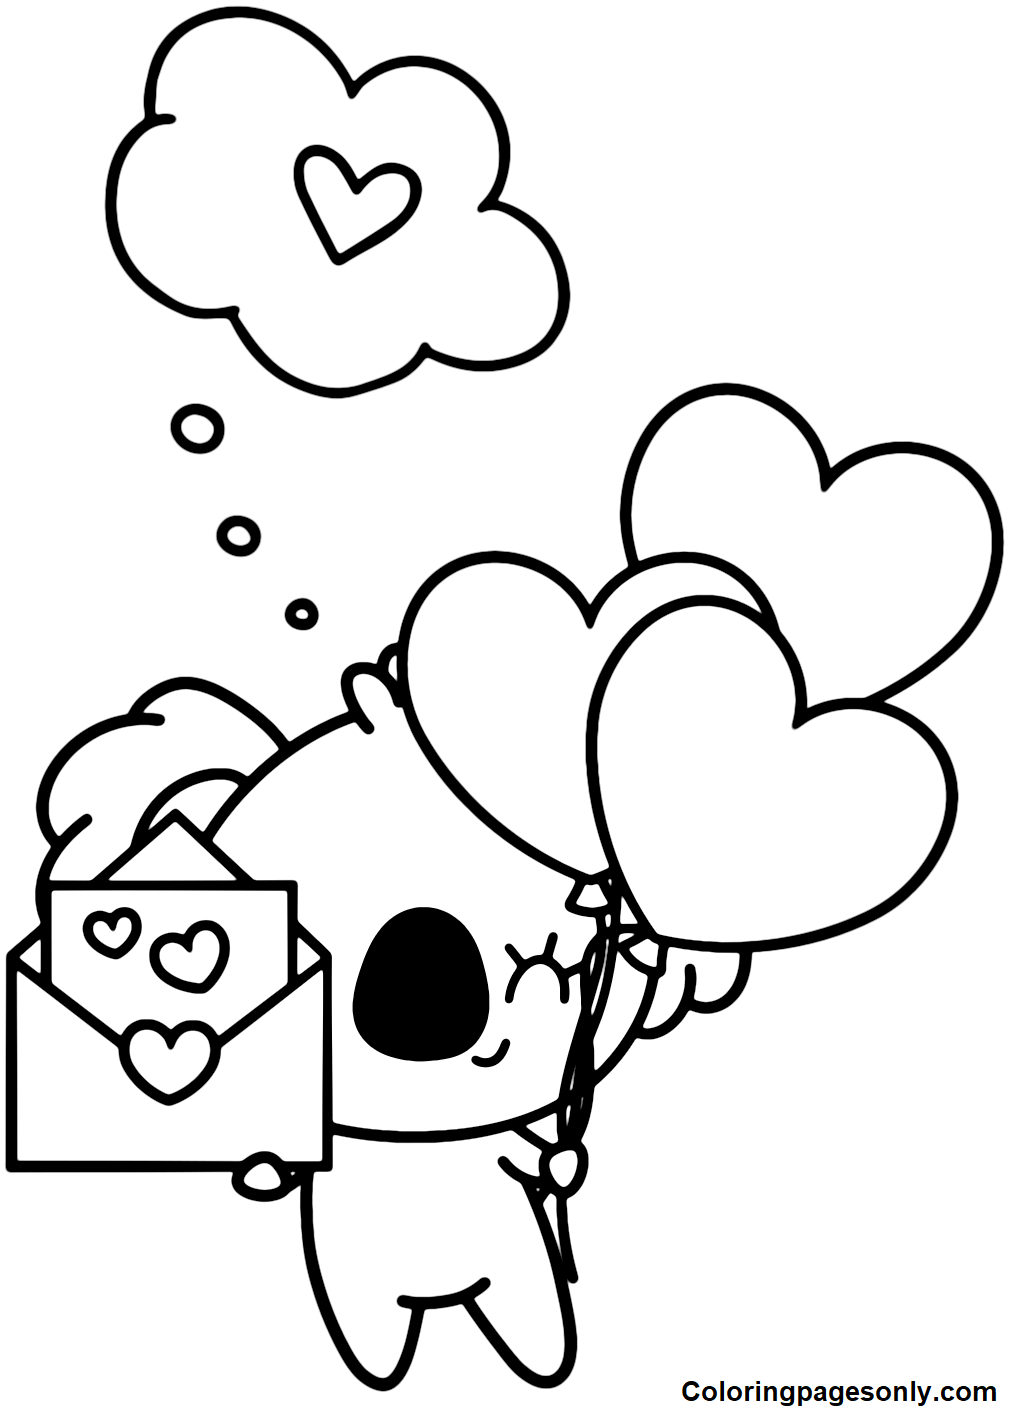 Koala Valentine’s Day Coloring Pages